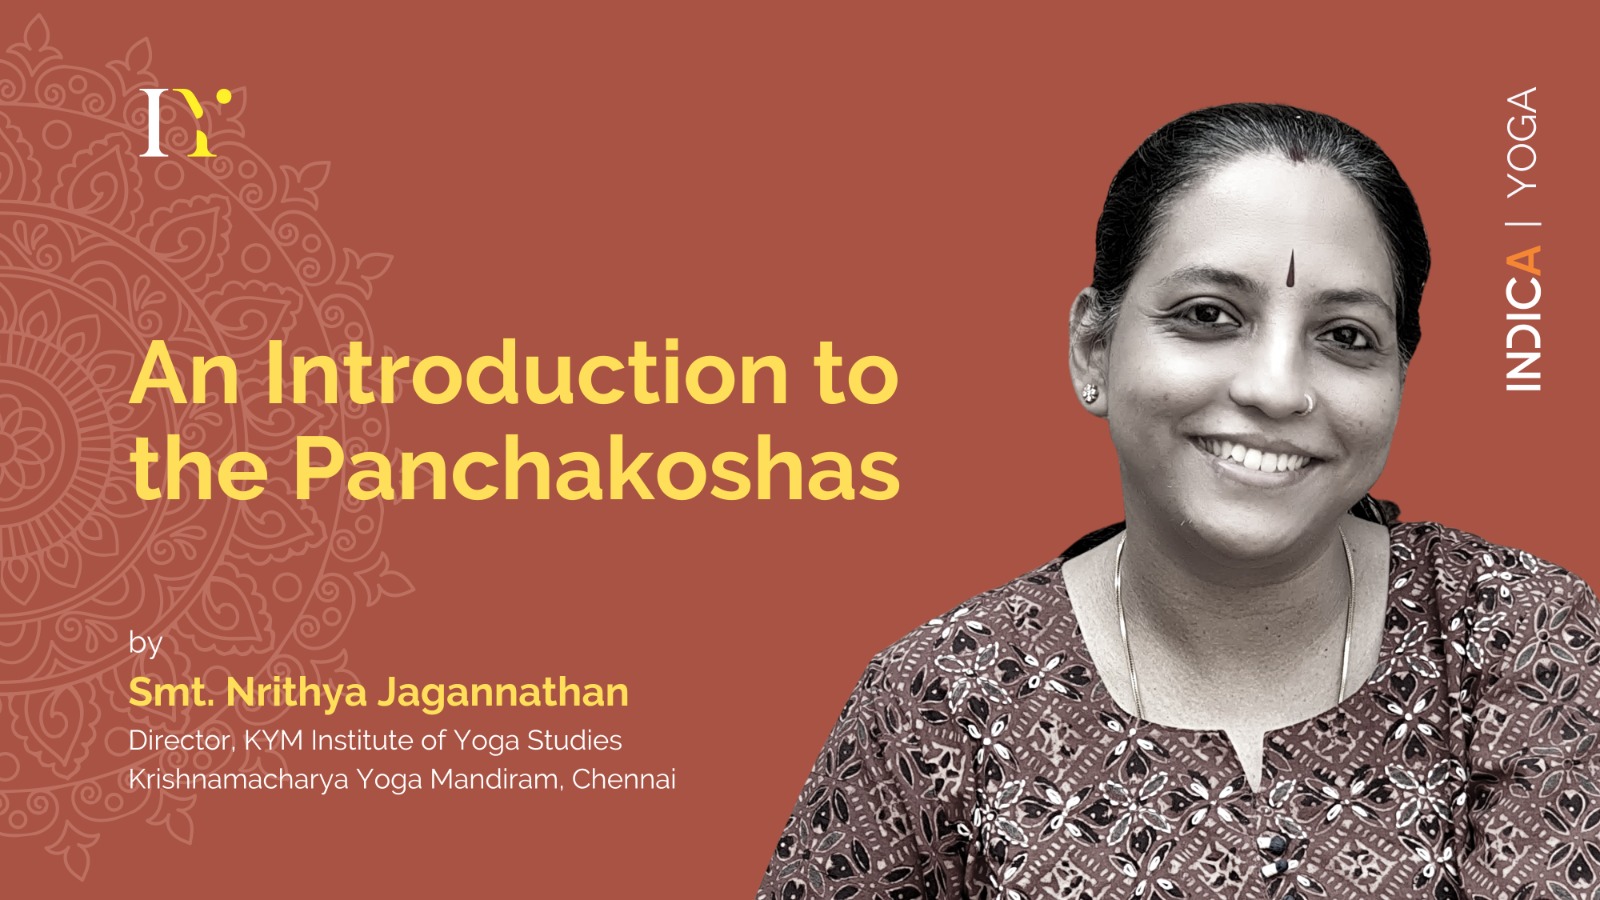 An Introduction to the Panchakoshas by Smt. Nrithya Jagannathan